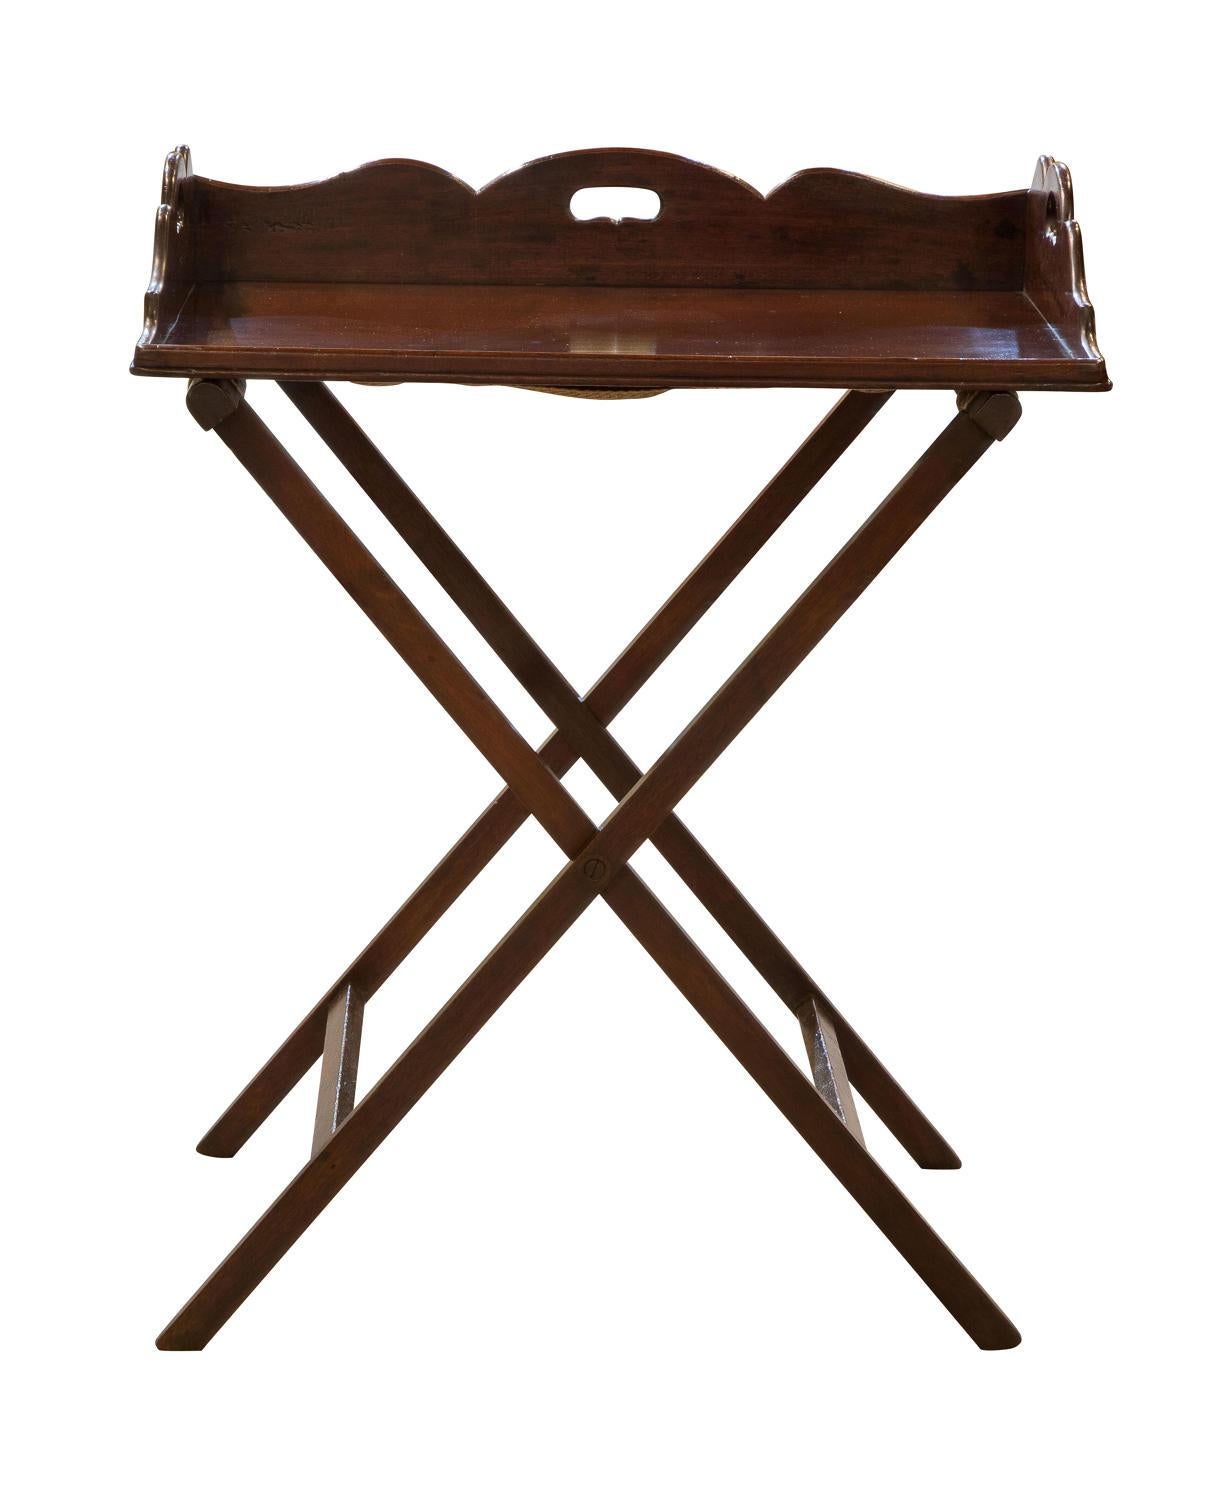 18th century mahogany butlers tray with shaped gallery and folding stand, circa 1780

- Height includes stand.